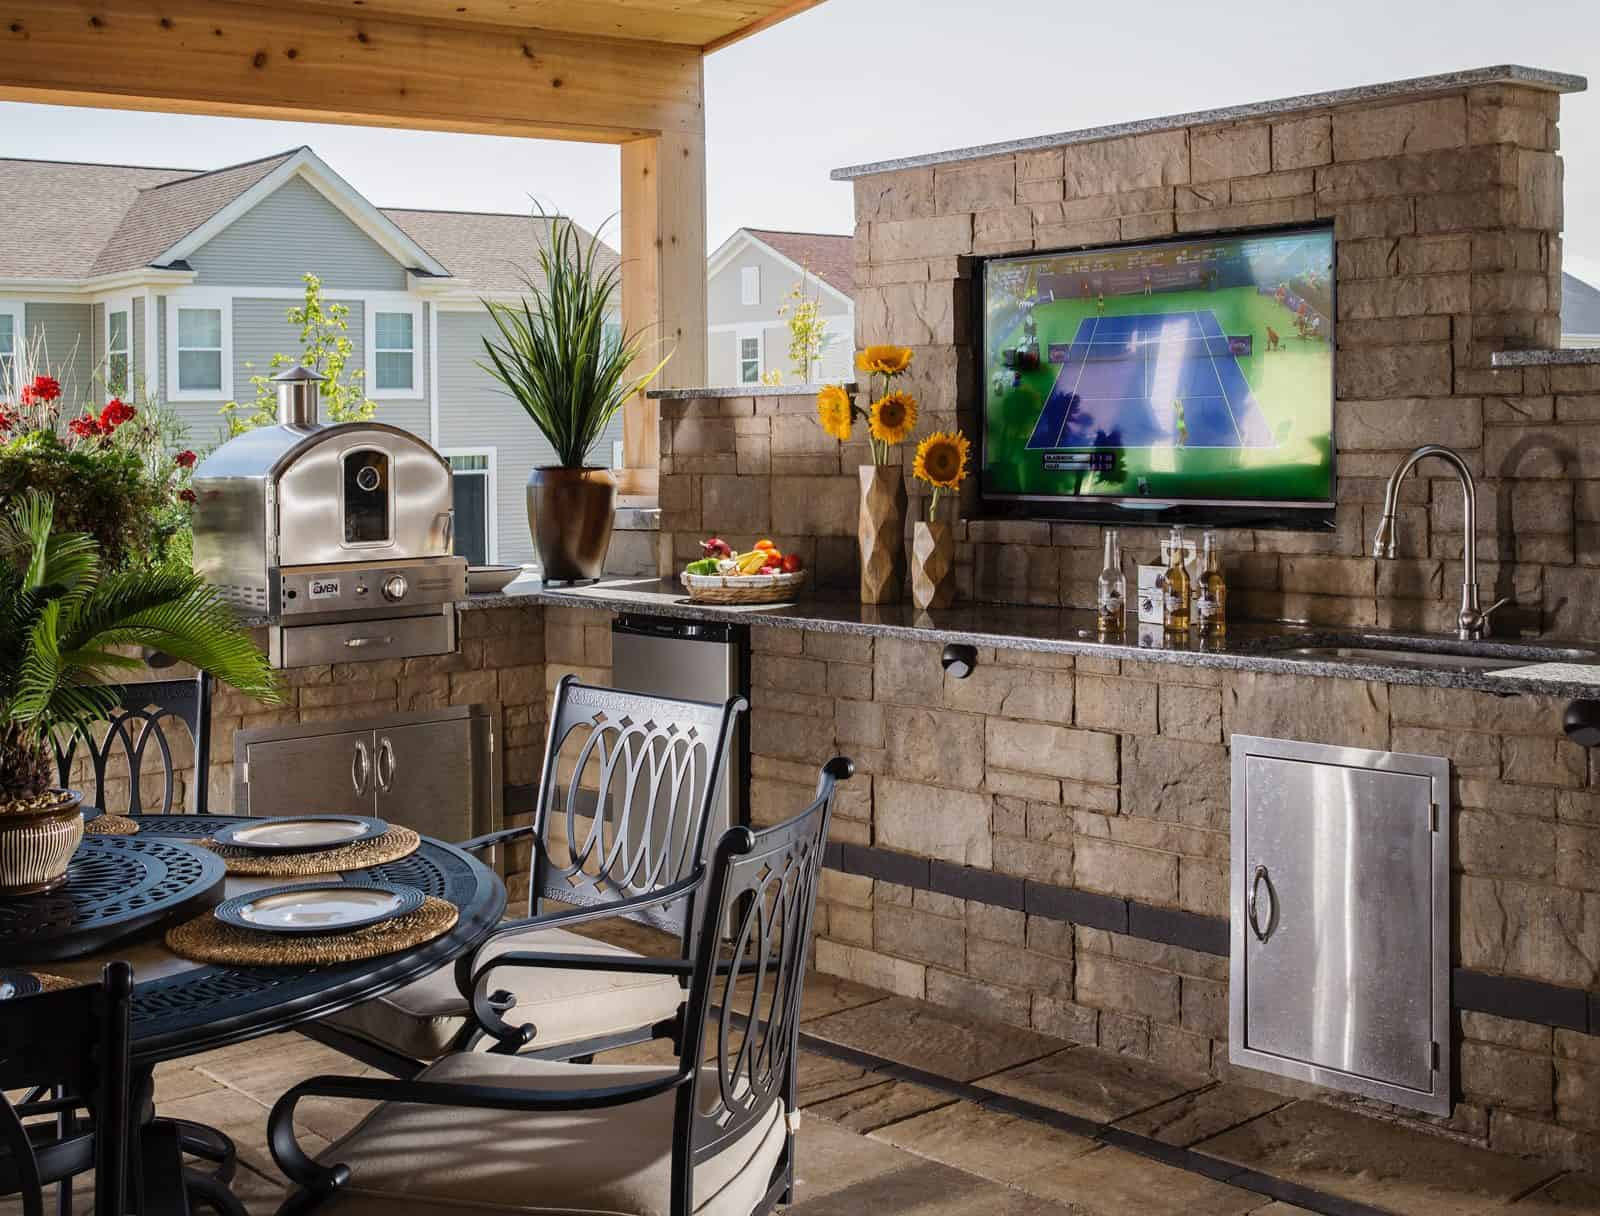 Rustic Outdoor Kitchen Ideas
 Outdoor Kitchen Ideas That Will Make You Drool